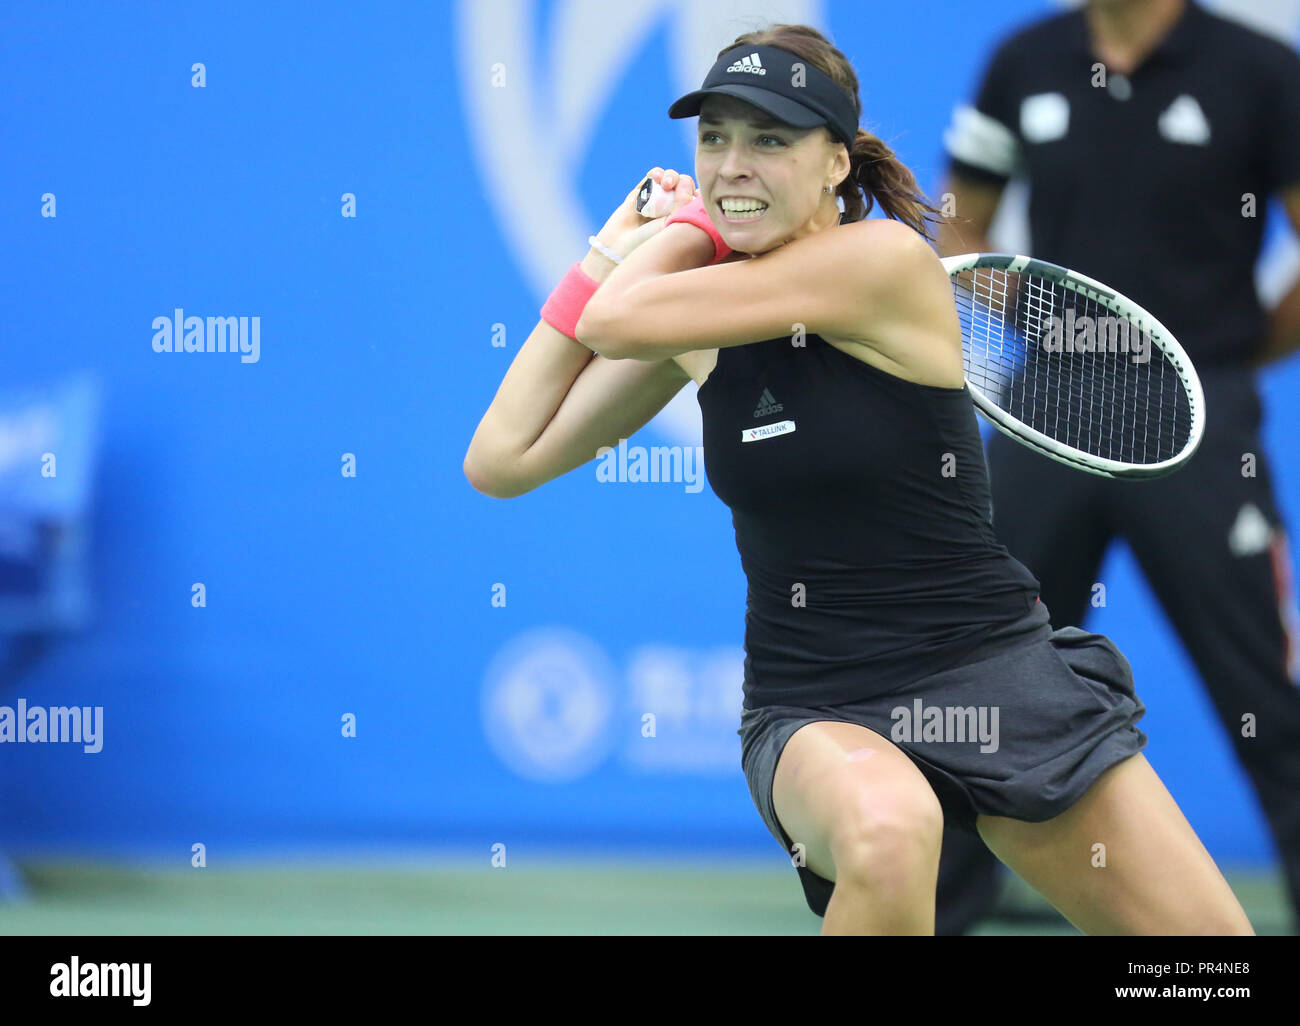 Wuhan, Wuhan, China. 29th Sep, 2018. Wuhan, CHINA-Estonian professional tennis player Anett Kontaveit defeats Wang Qiang at 2018 Wuhan Open in Wuhan, central ChinaÃ¢â‚¬â„¢s Hubei Province. Credit: SIPA Asia/ZUMA Wire/Alamy Live News Stock Photo